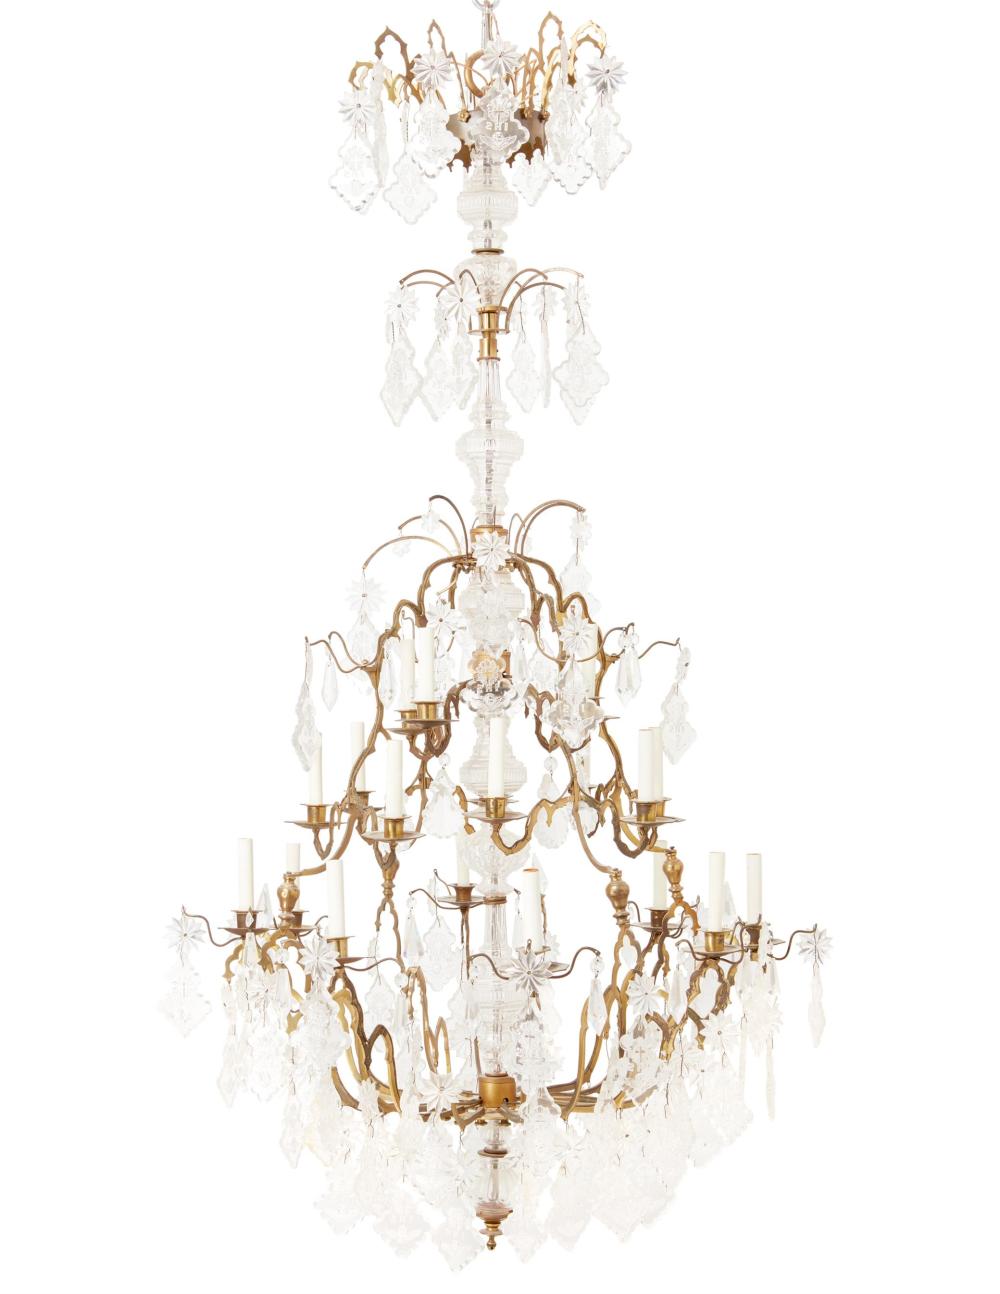 A BRONZE AND CRYSTAL CHANDELIERA